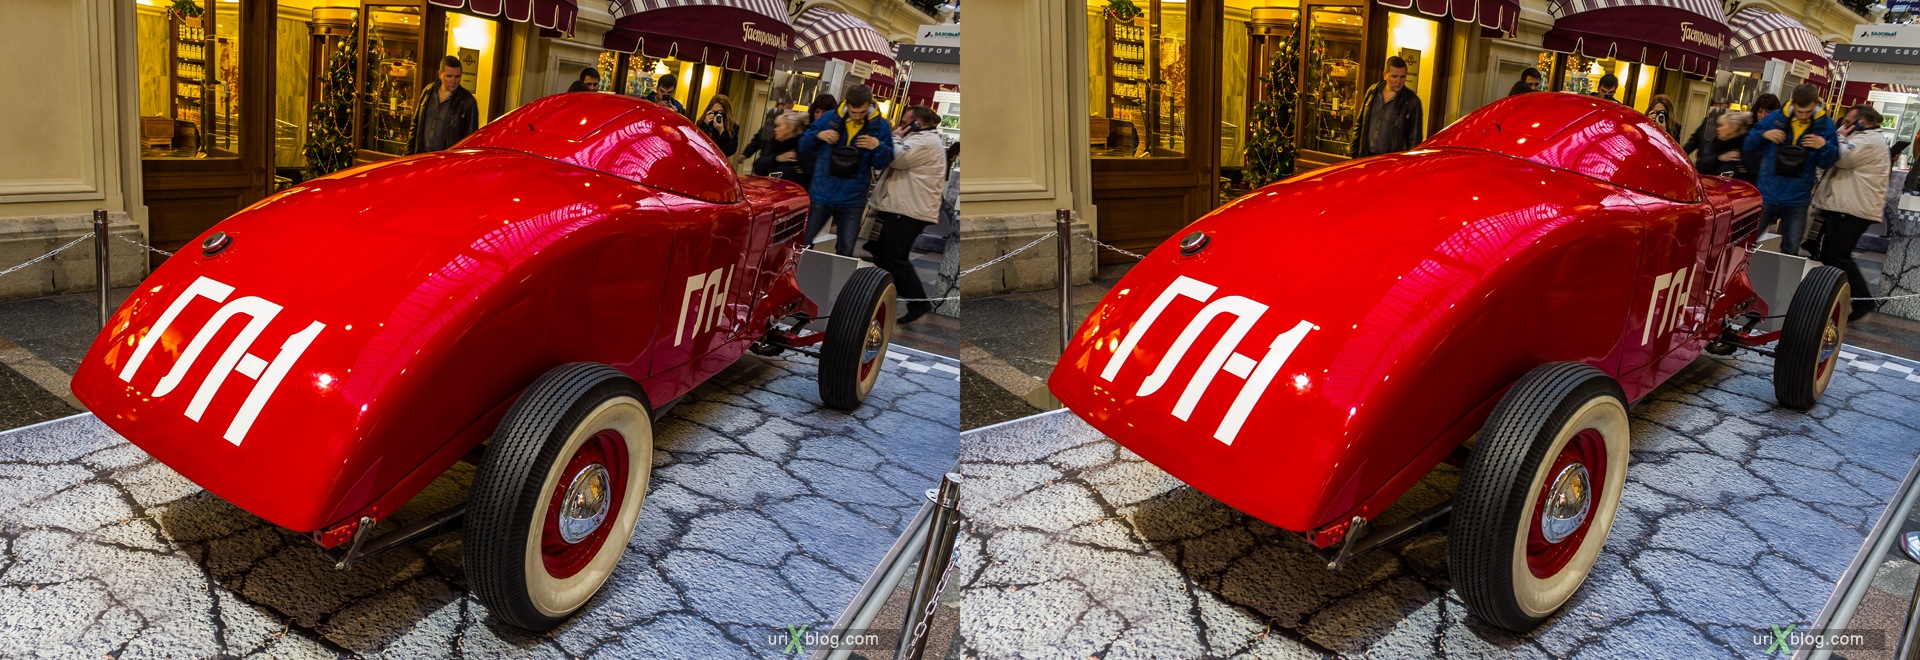 2013, Moscow, Russia, GAZ-GL-1, GUM, old, automobile, vehicle, exhibition, shop, mall, 3D, stereo pair, cross-eyed, crossview, cross view stereo pair, stereoscopic